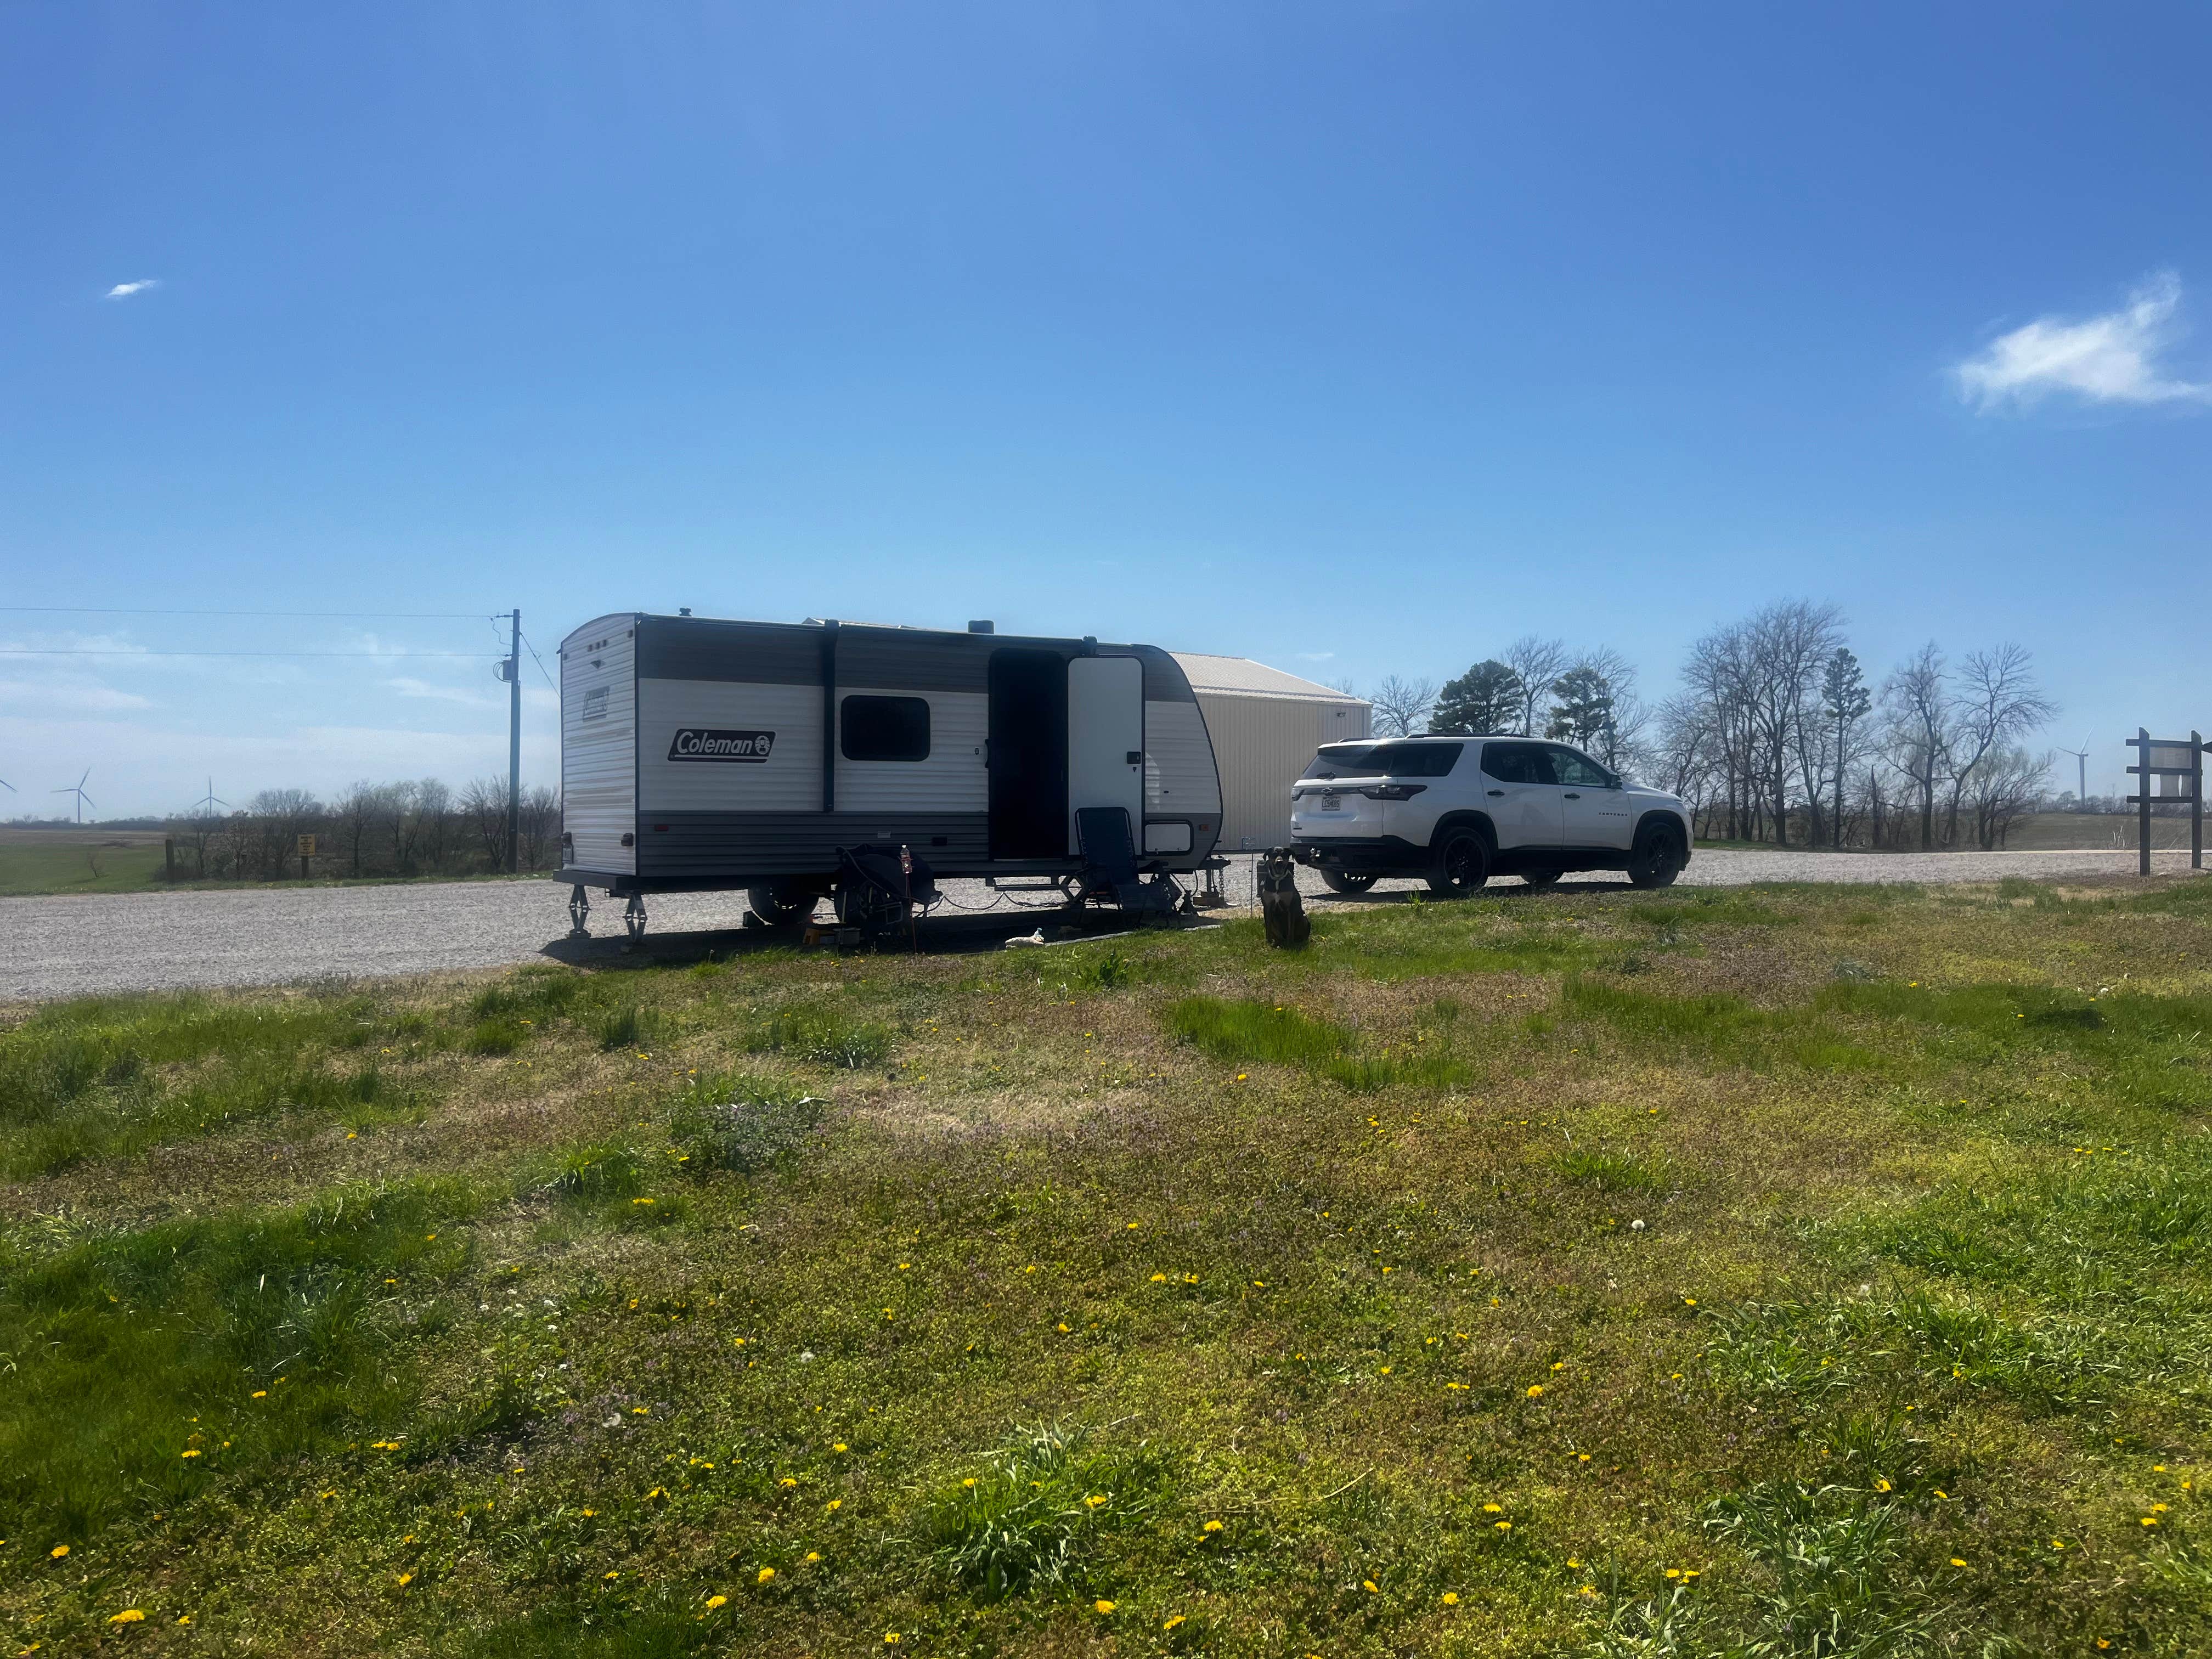 Camper submitted image from Pony Express Lake Conservation Area - 1